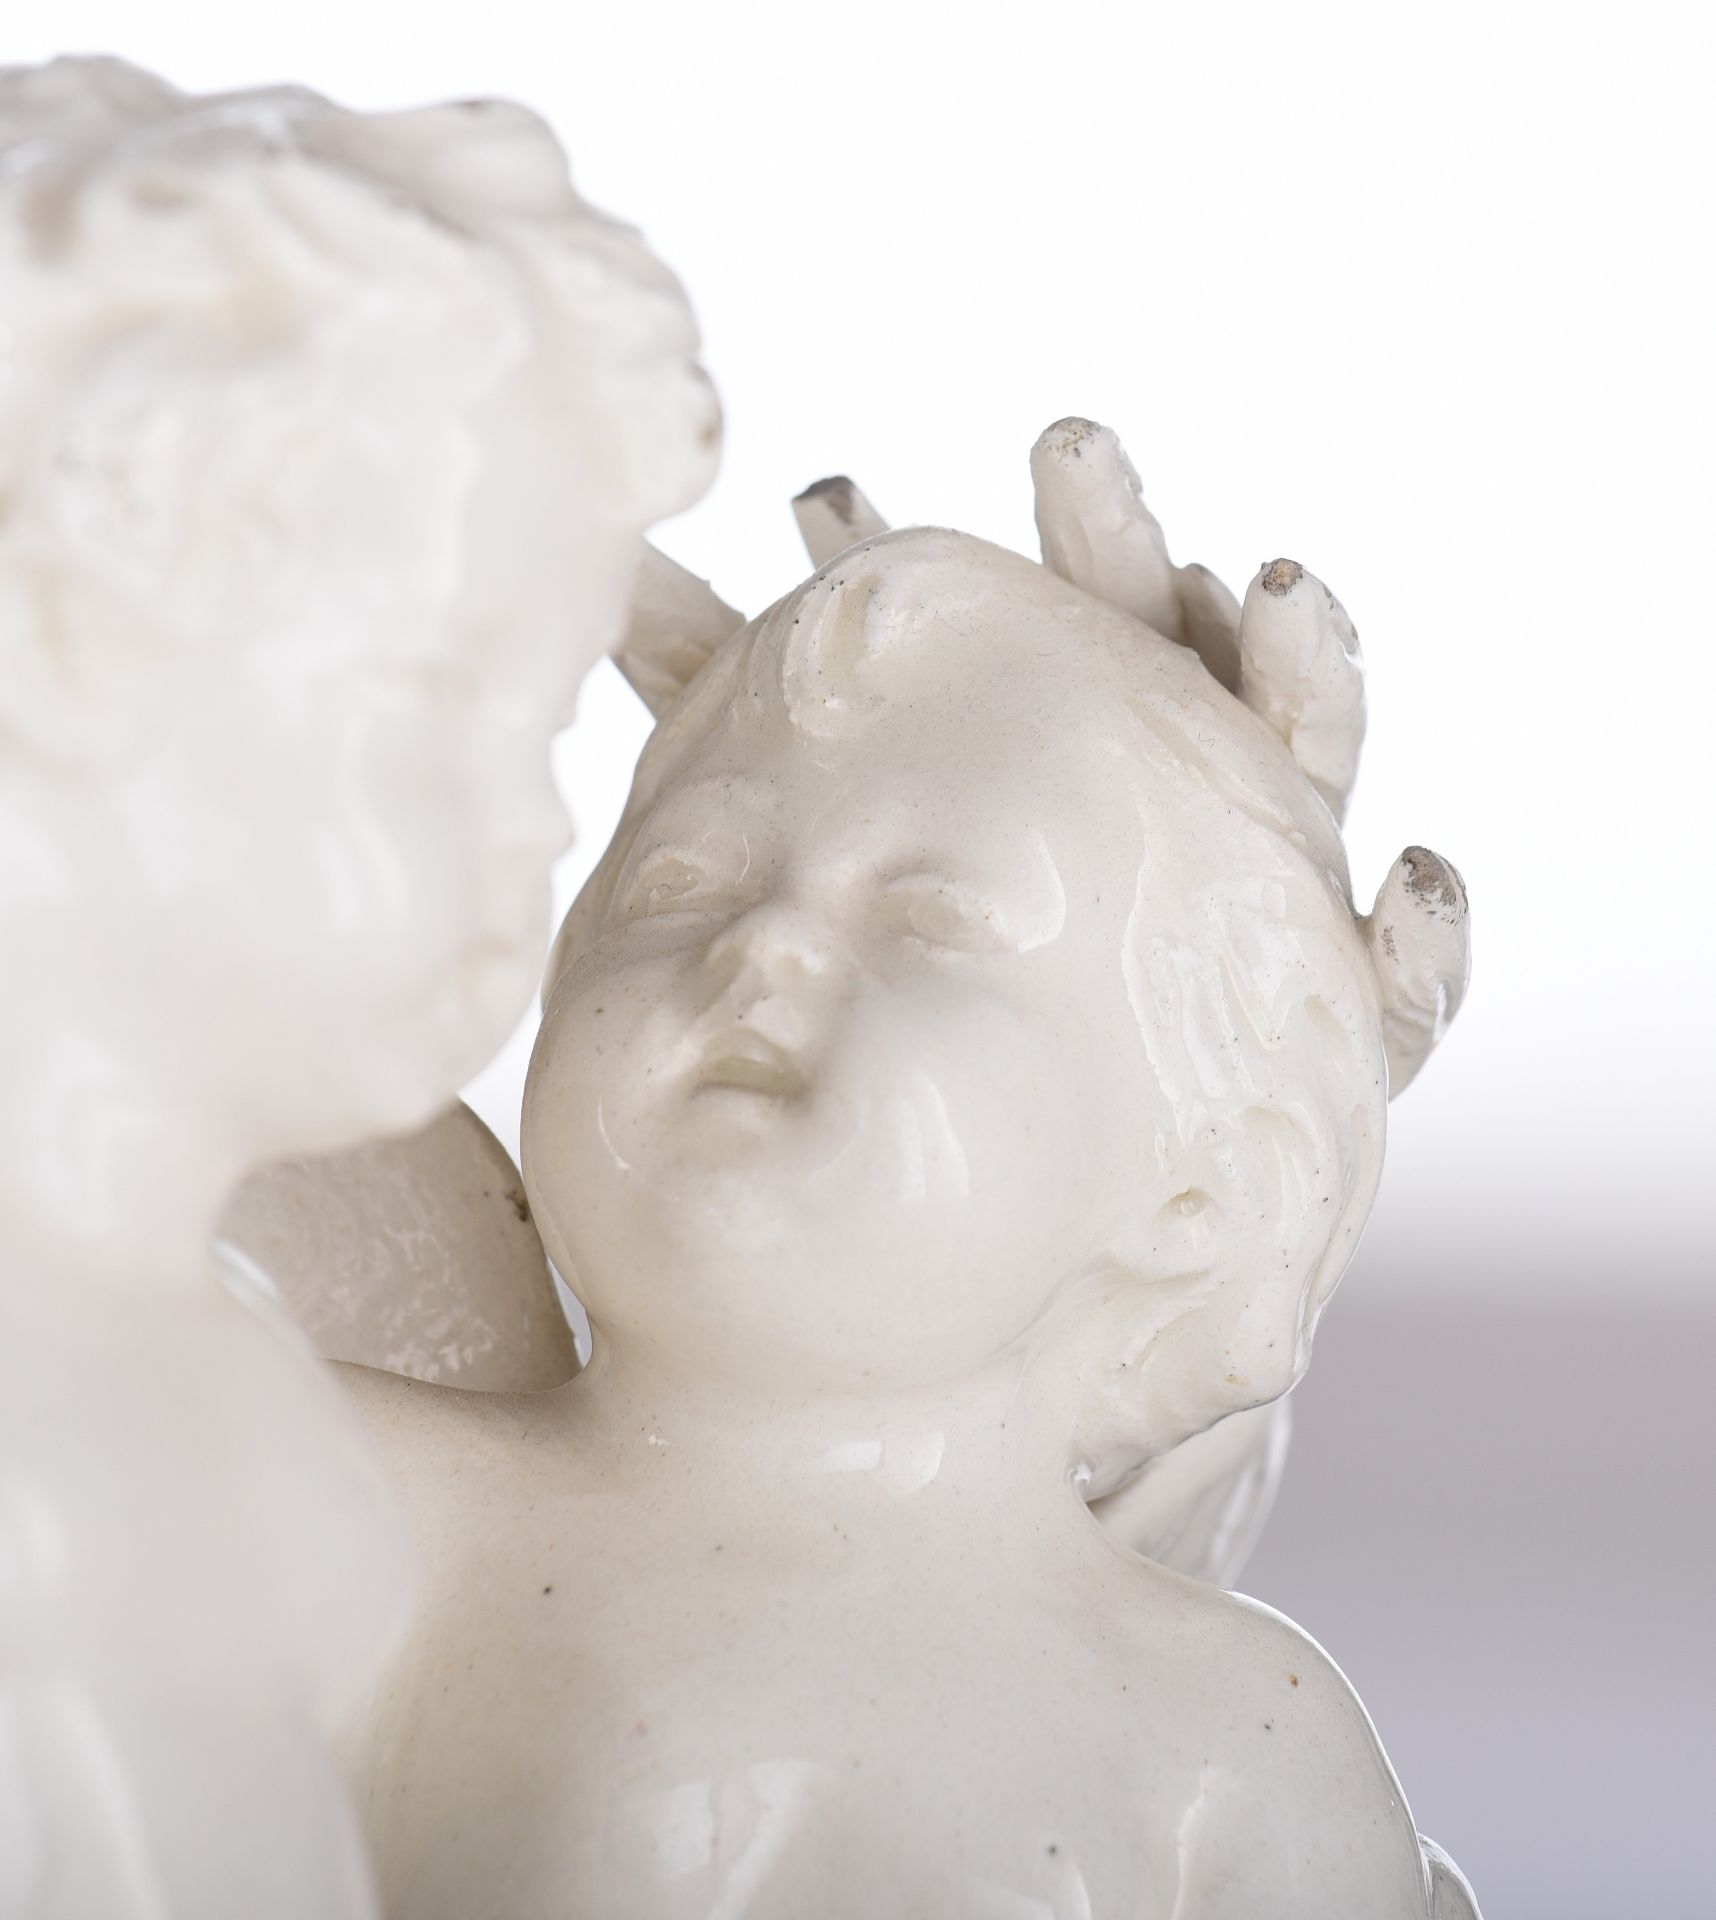 (BIDDING ONLY ON CARLOBONTE.BE) Two white glazed Capodimonte figural groups, Naples, H 20 - 23 cm - Image 13 of 16